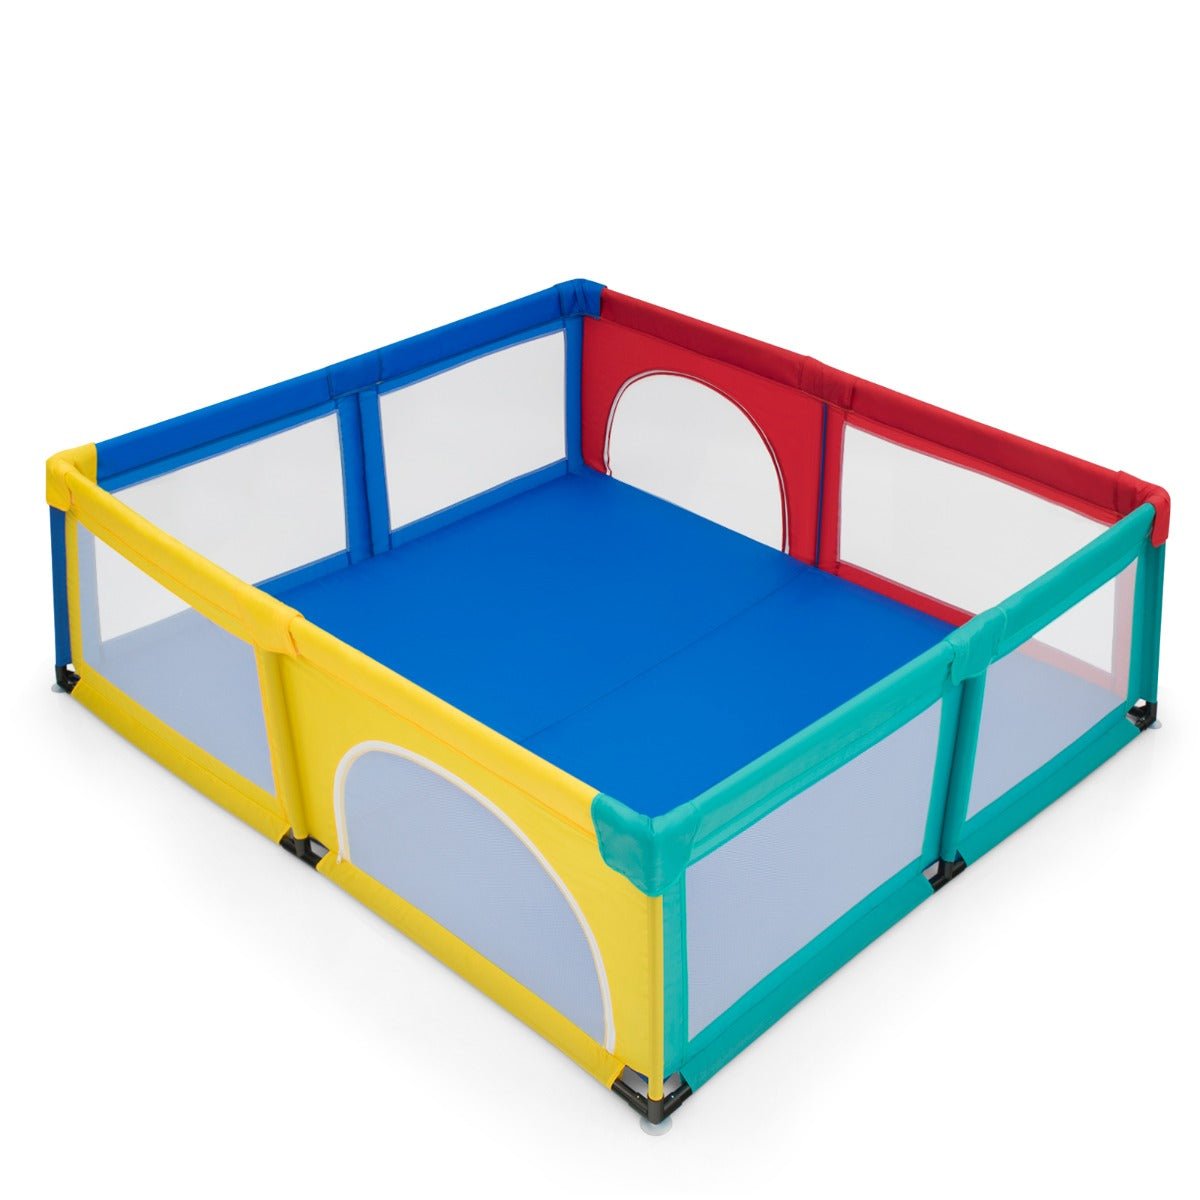 Extra Large Multicolour Baby Playpen: Safety Gates & Mesh Walls